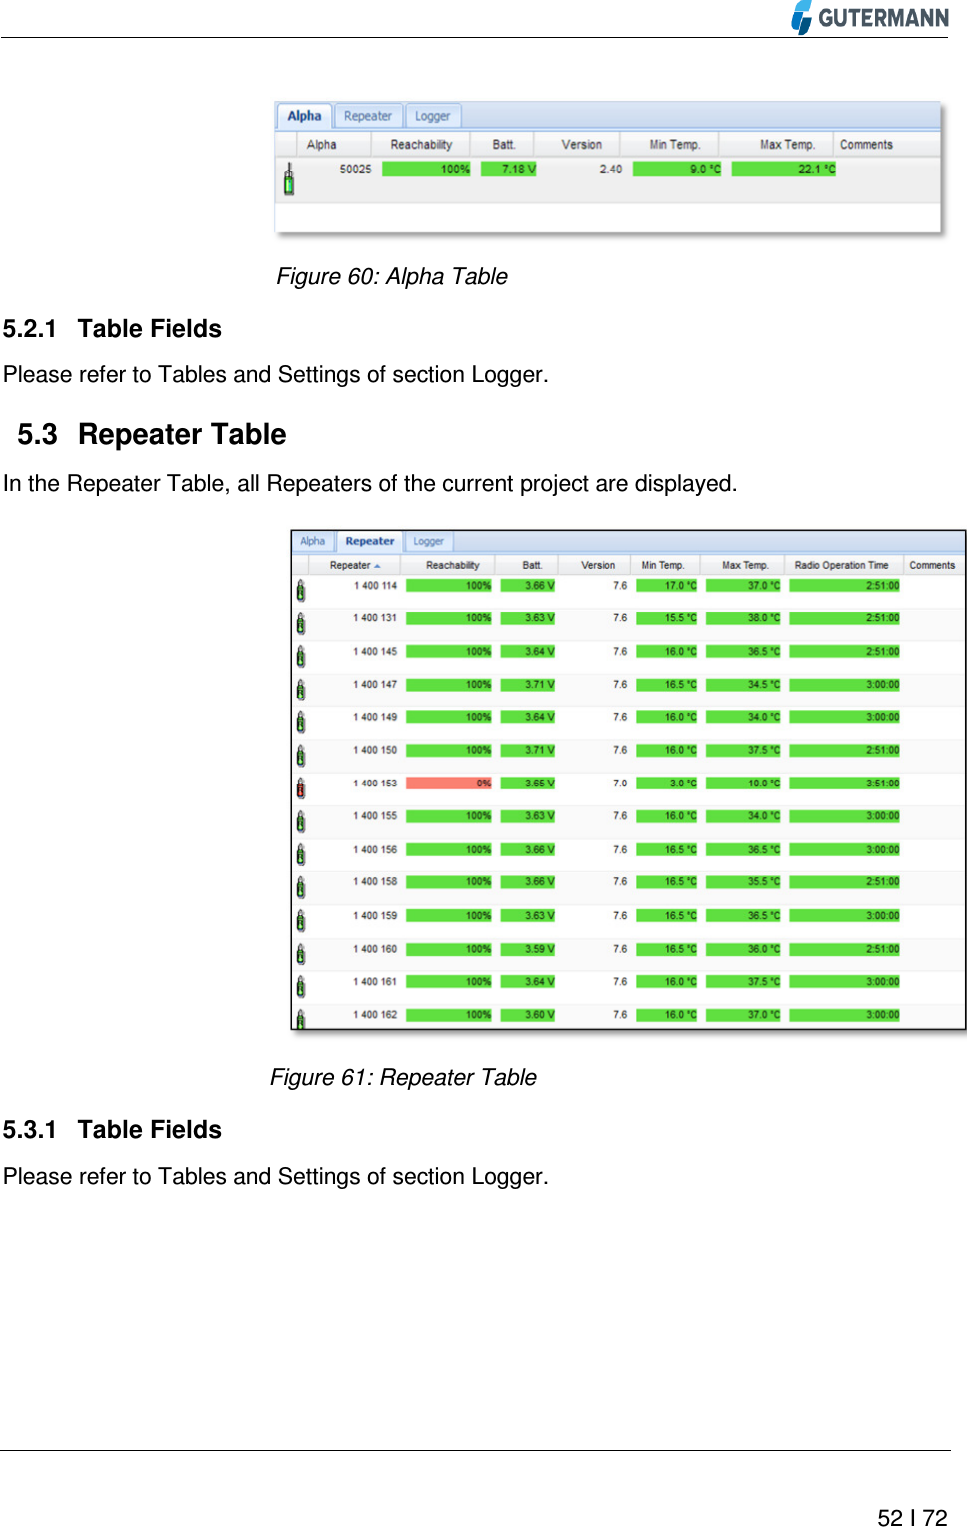          52 I 72    Figure 60: Alpha Table 5.2.1  Table Fields Please refer to Tables and Settings of section Logger.   Repeater Table 5.3In the Repeater Table, all Repeaters of the current project are displayed.   Figure 61: Repeater Table 5.3.1  Table Fields Please refer to Tables and Settings of section Logger.    